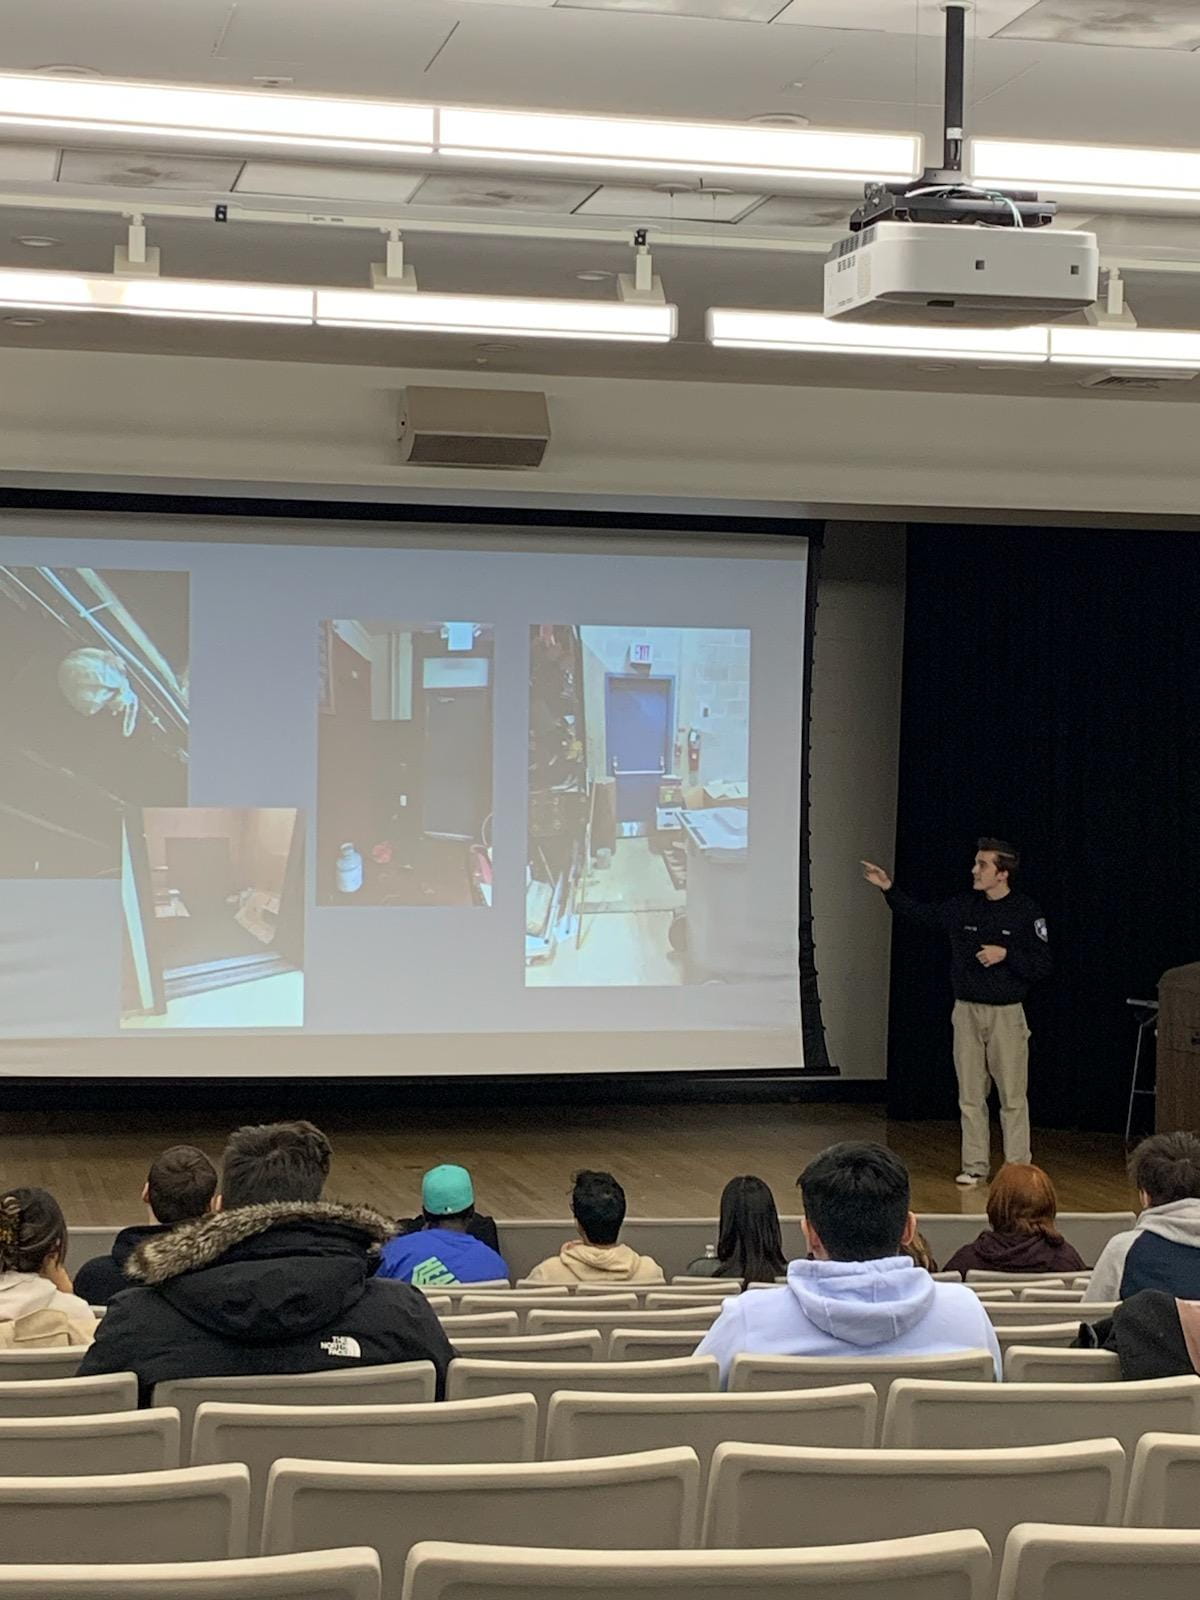 Joey presented fire safety messaging to about 100 resident assistants and other Student Life stakeholders at Nesbitt Hall for their pre-term training